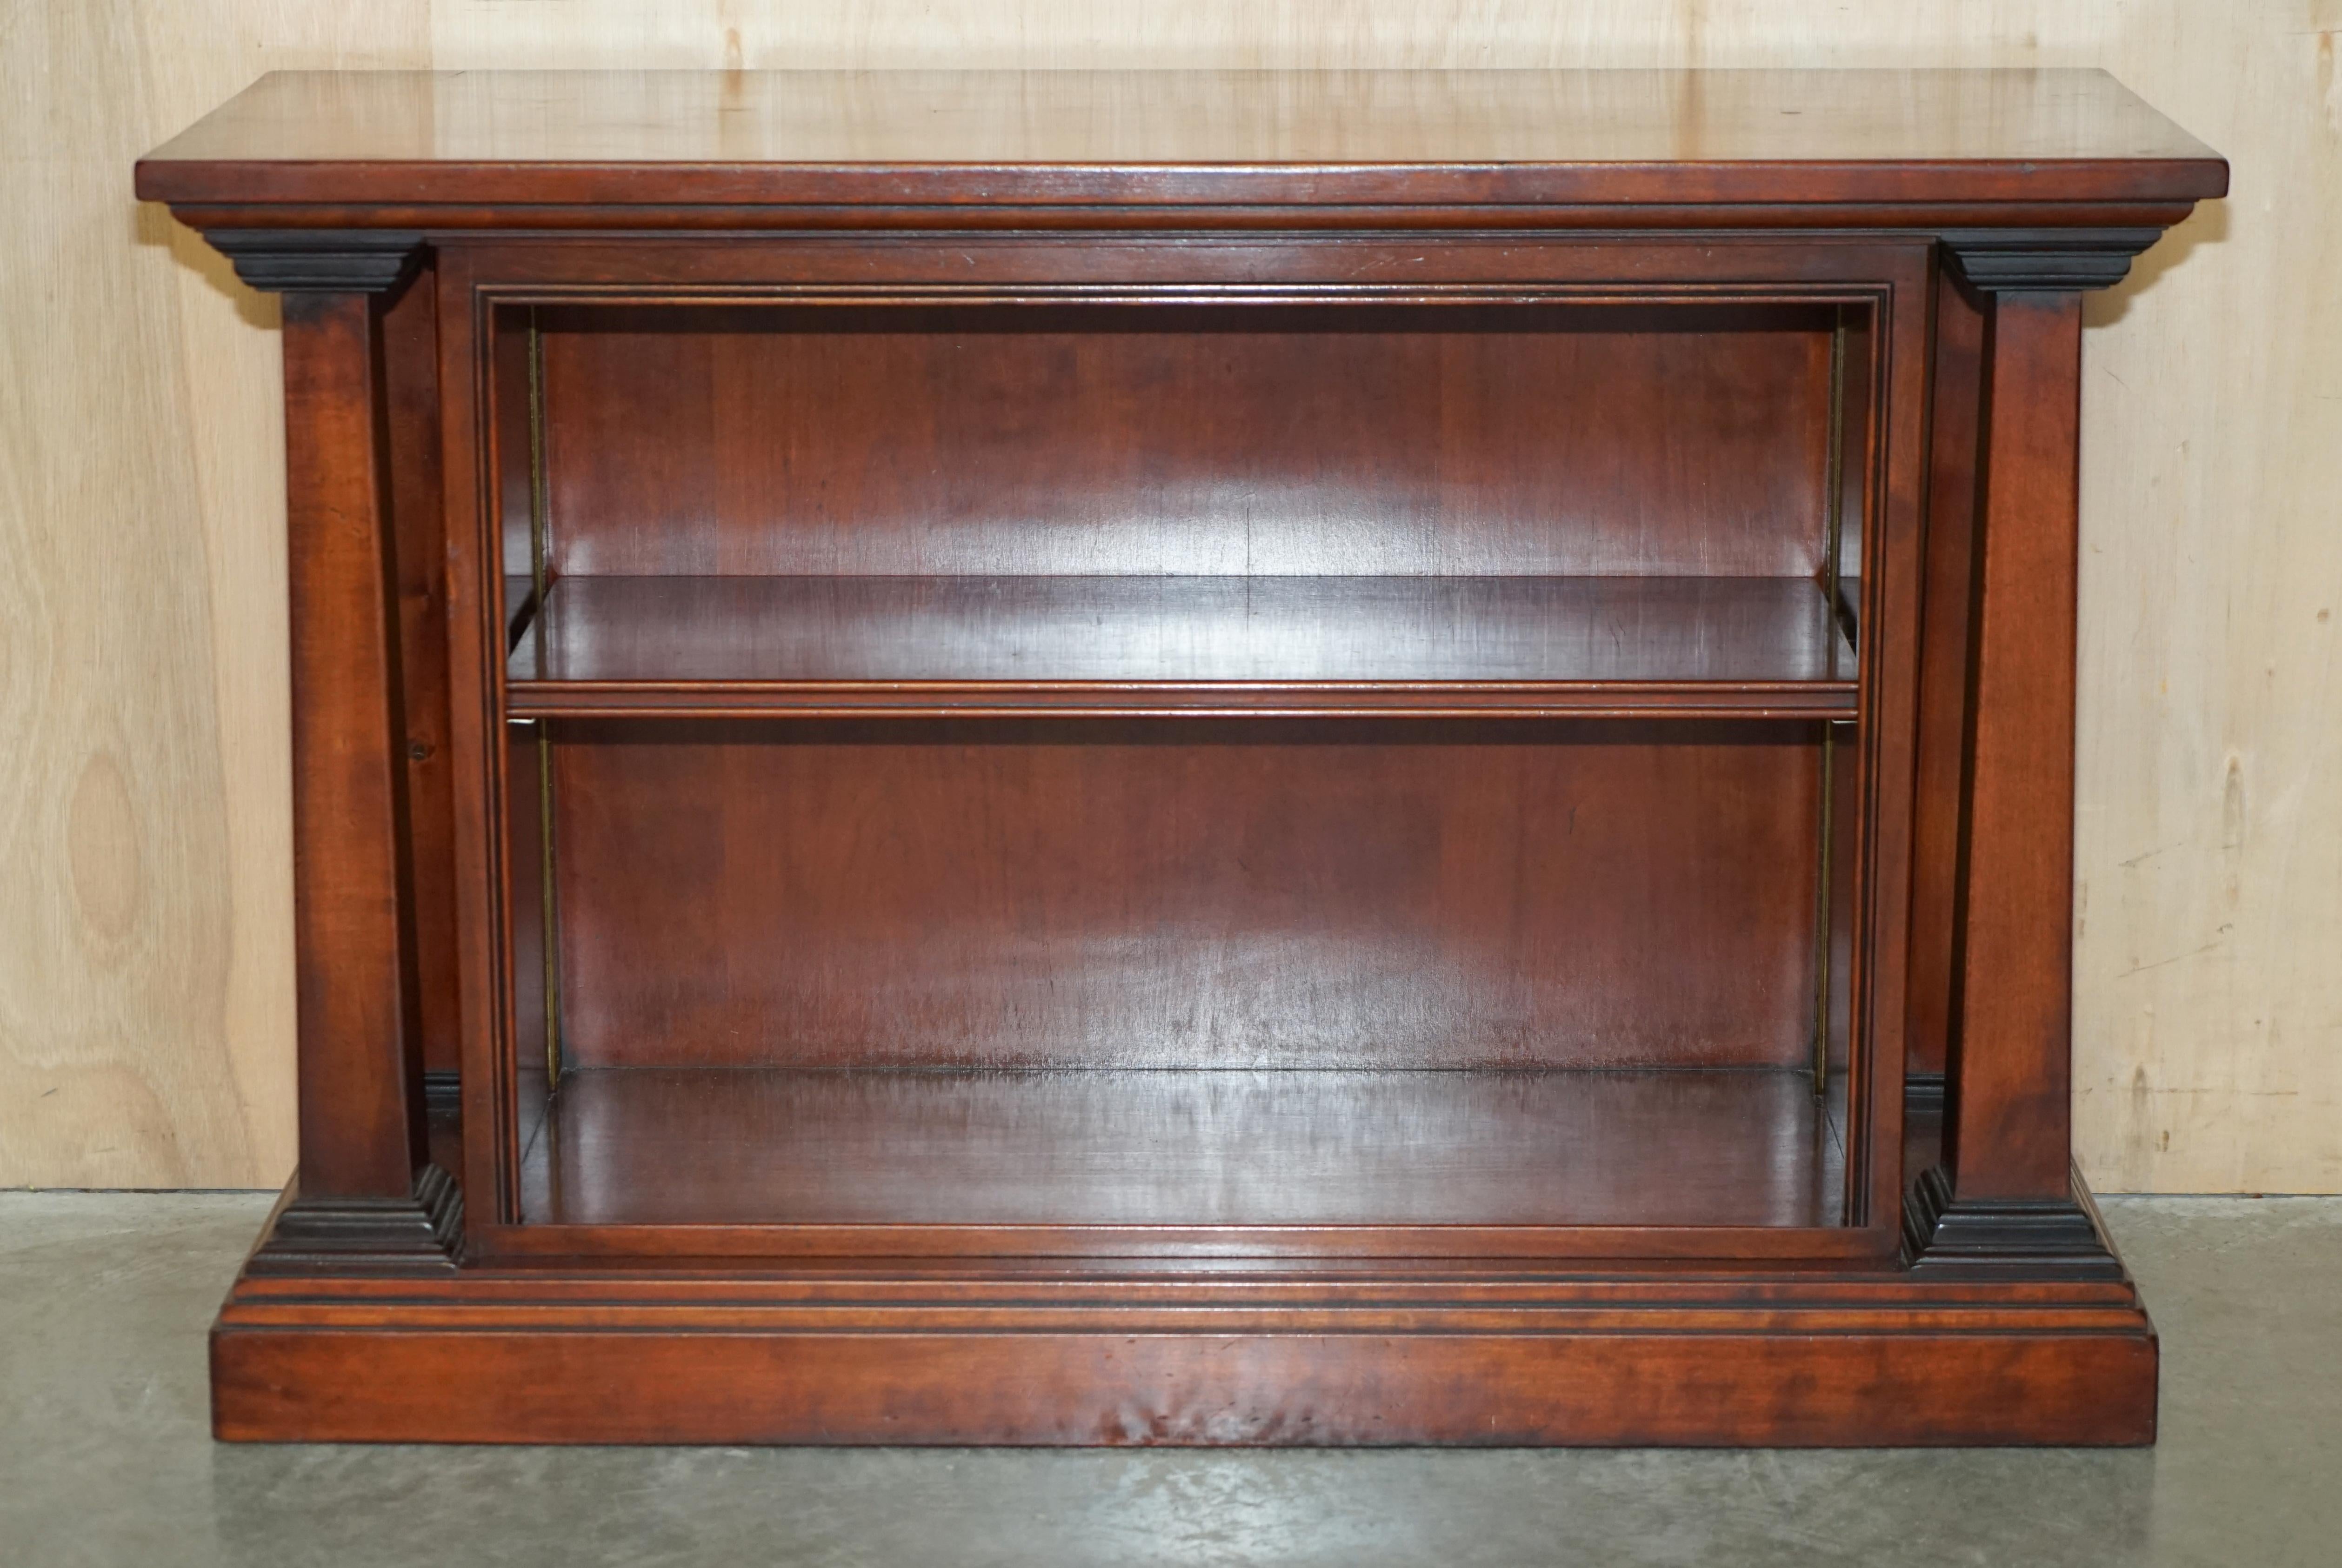 English Reh Kennedy Harrods London Solid Hardwood Open Pillared Dwarf Library Bookcase For Sale